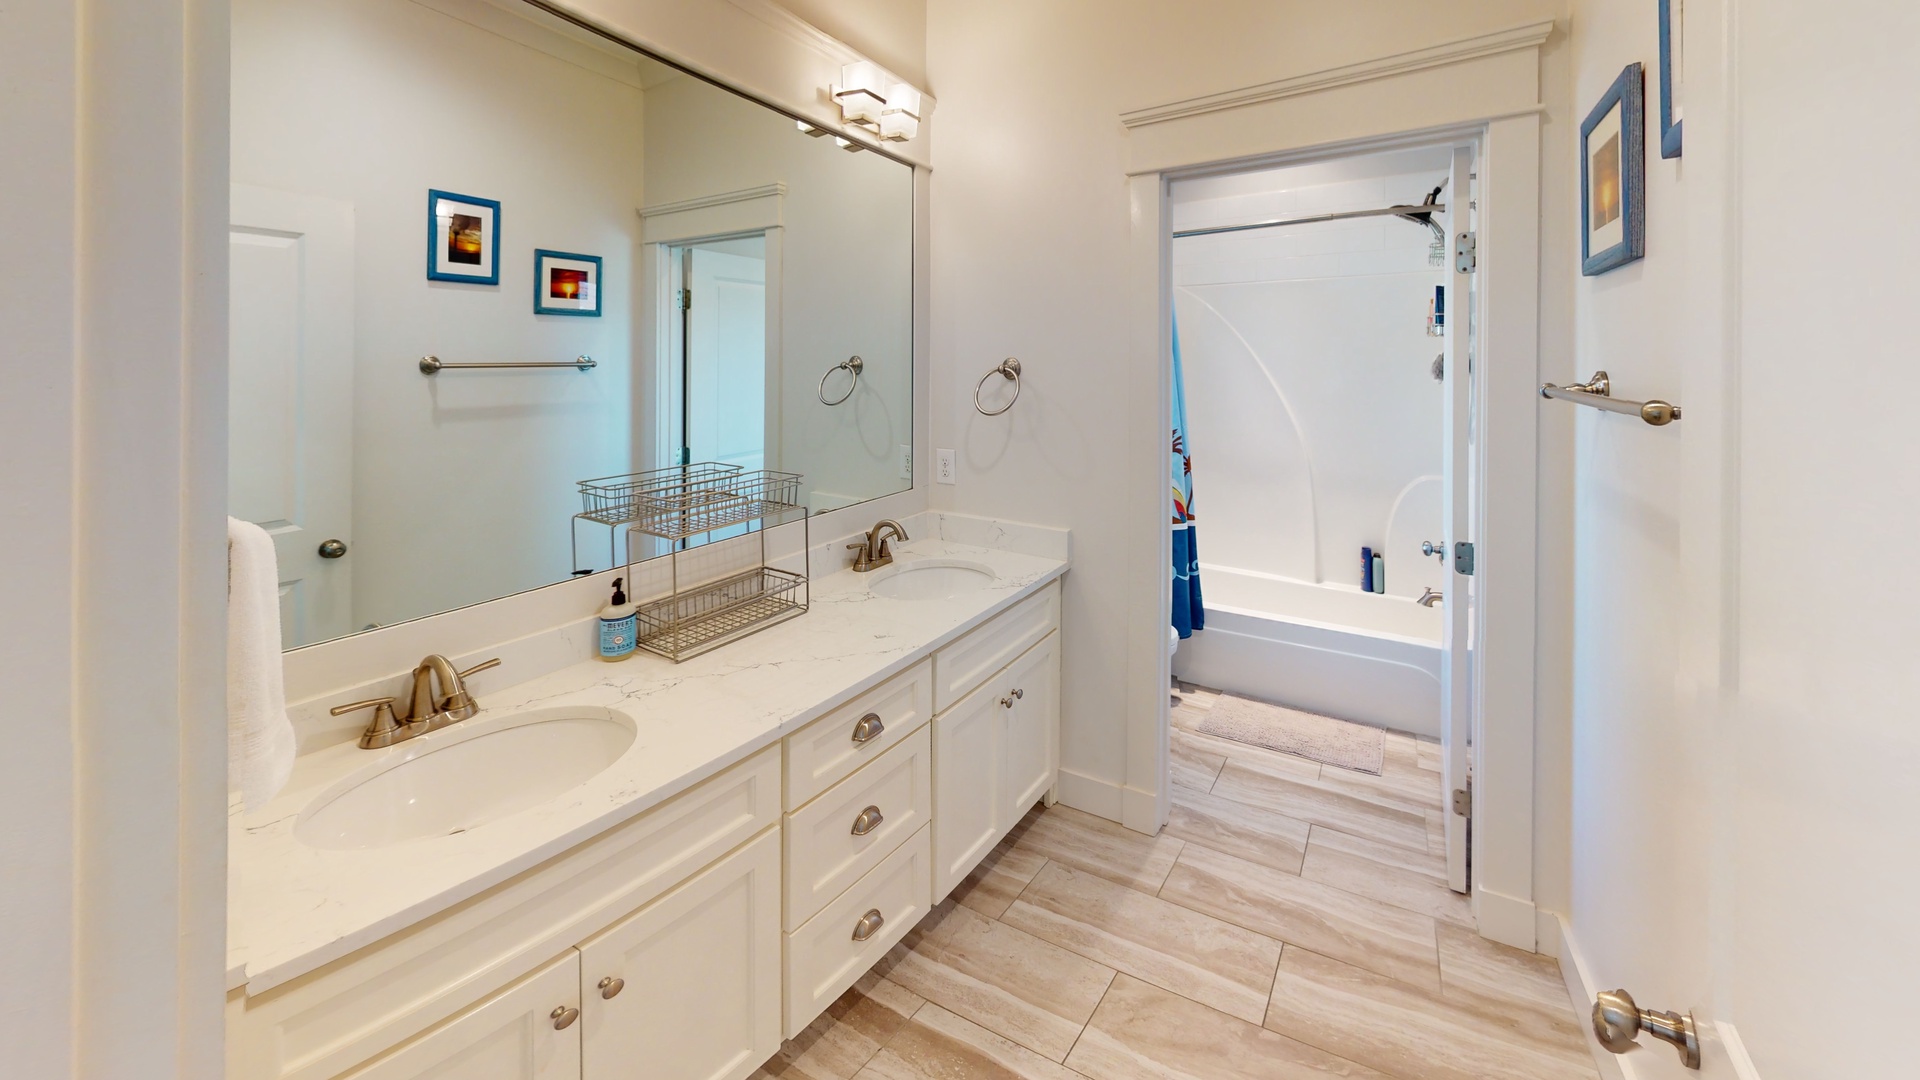 Shared hall bathroom on the 2nd floor with a double vanity and tub/shower combo